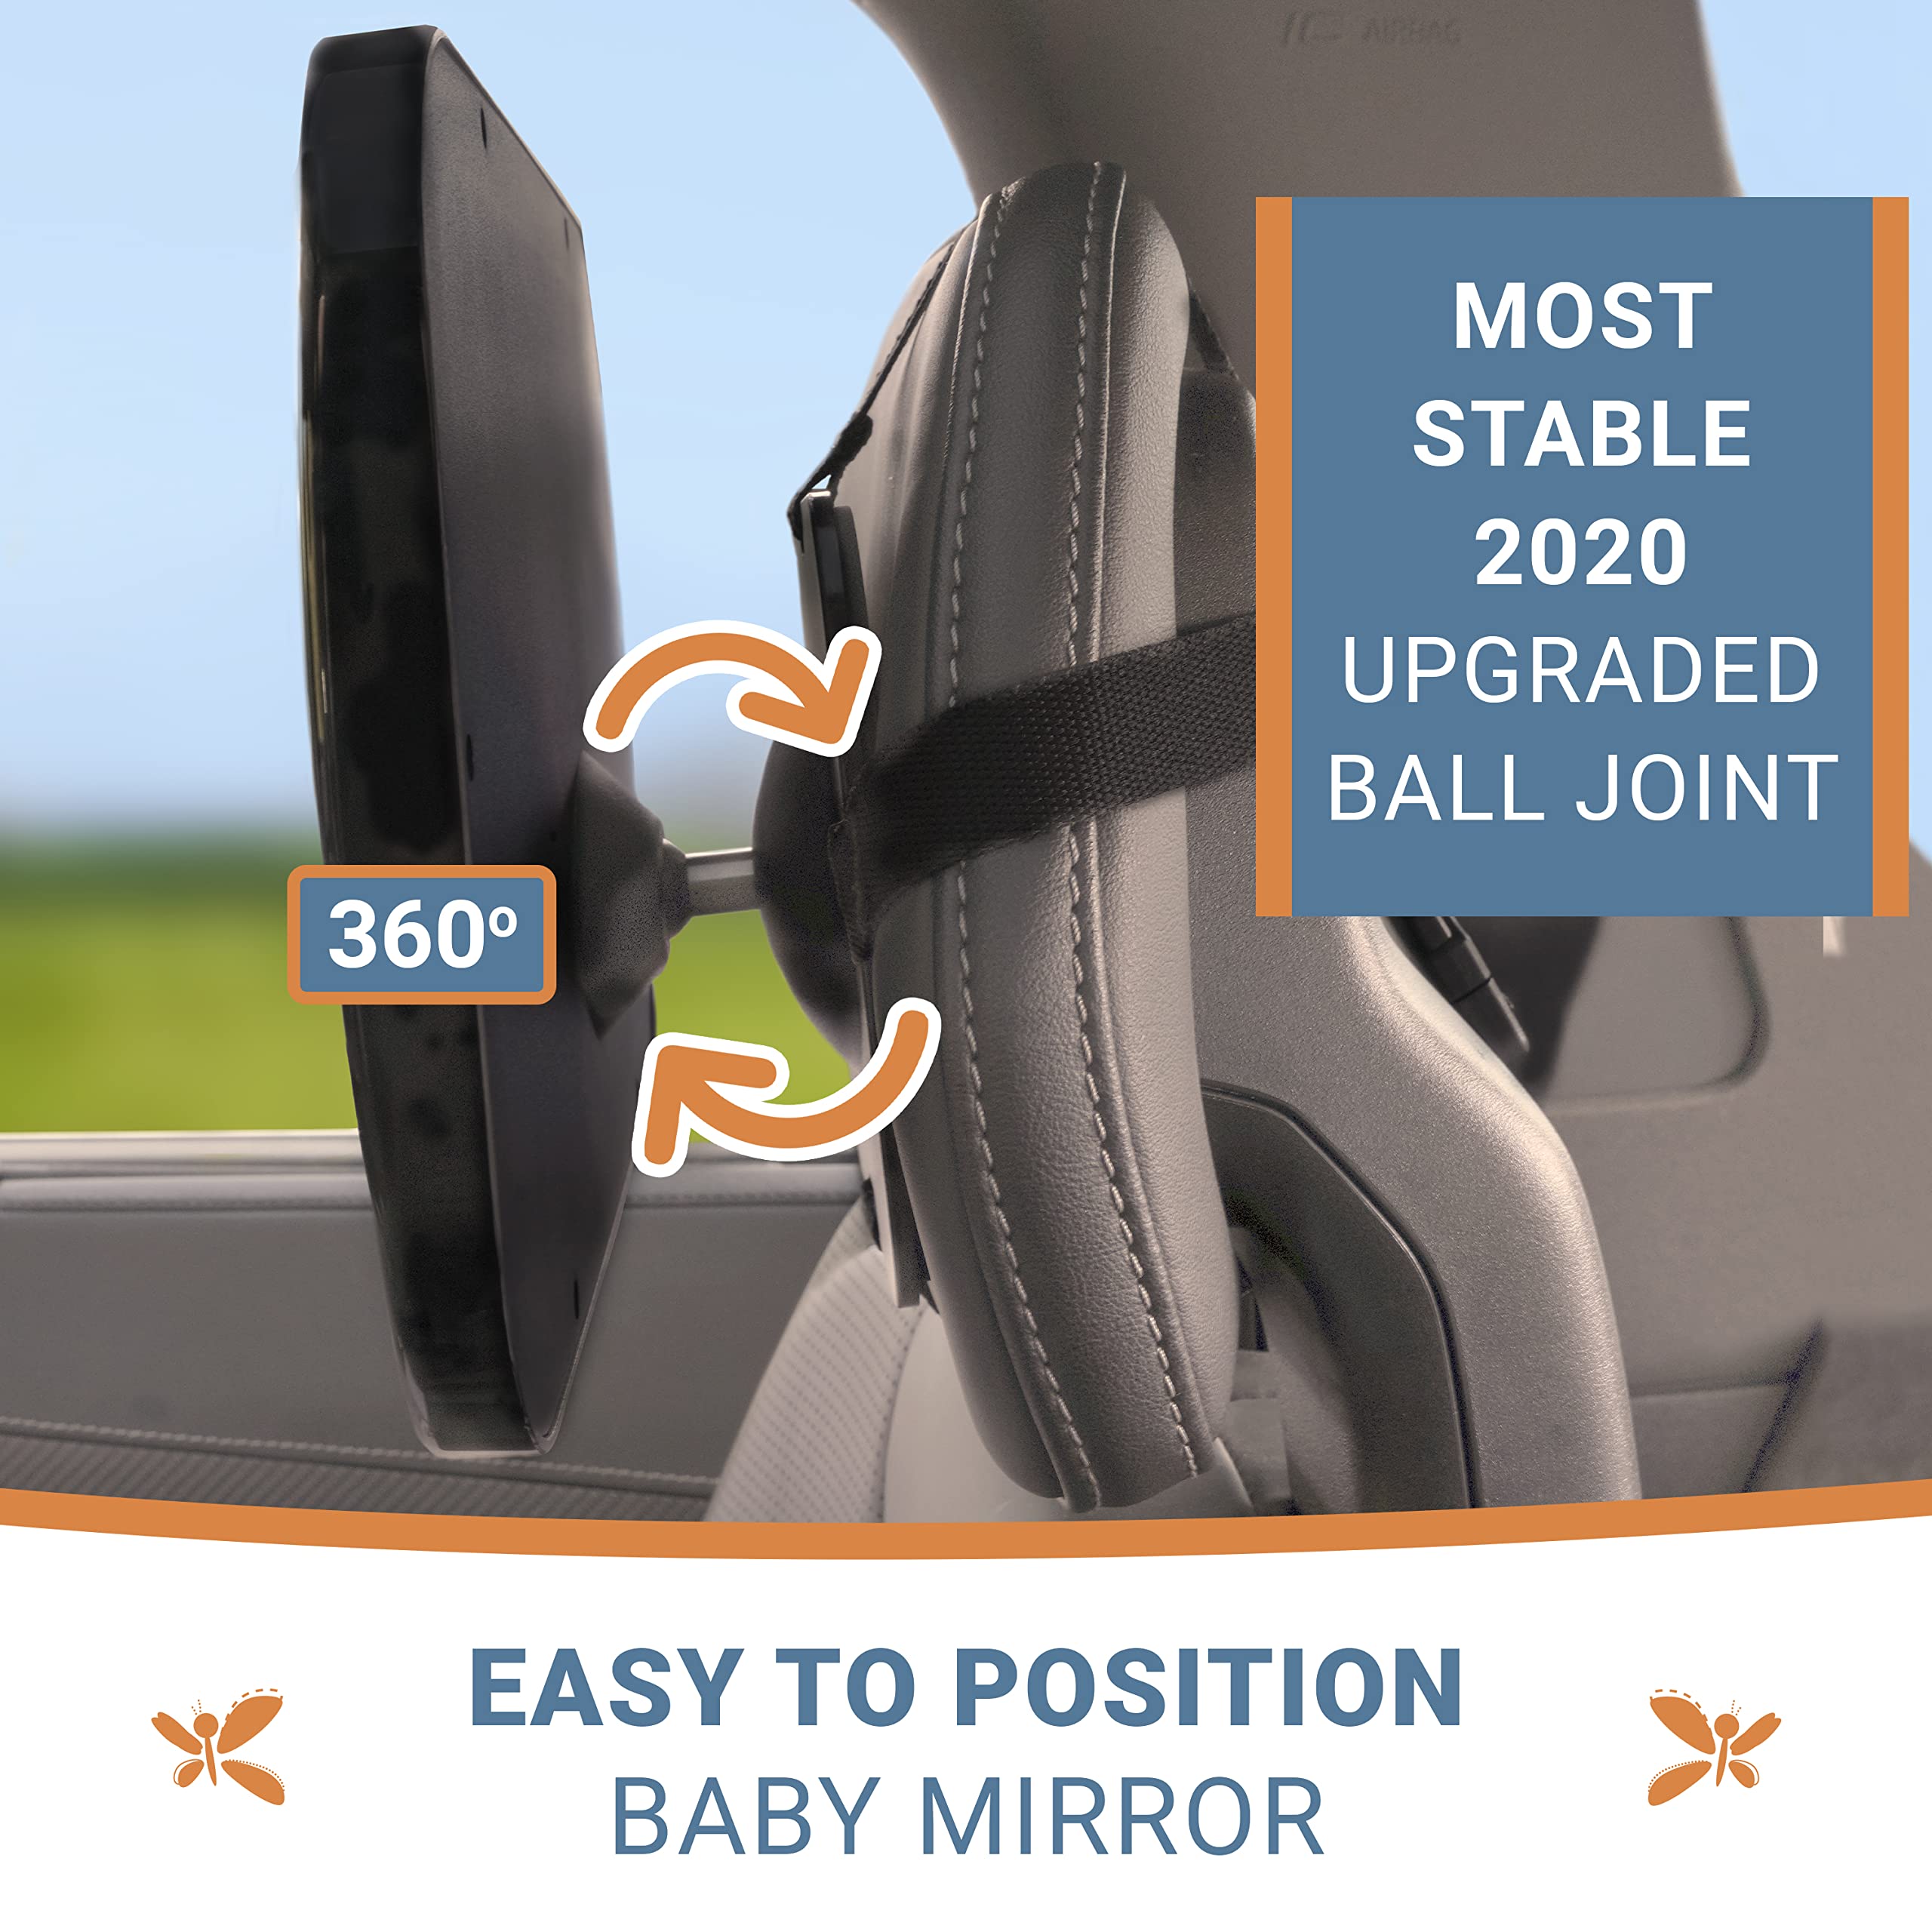 Shatterproof Baby Car Mirror, Fully View Infant in Rear Facing Car Seat - Newborn Safety, Crash Tested & Extra Wide, Crystal Clear, 100% Lifetime Satisfaction Guarantee, Easy Install by Cozy Greens